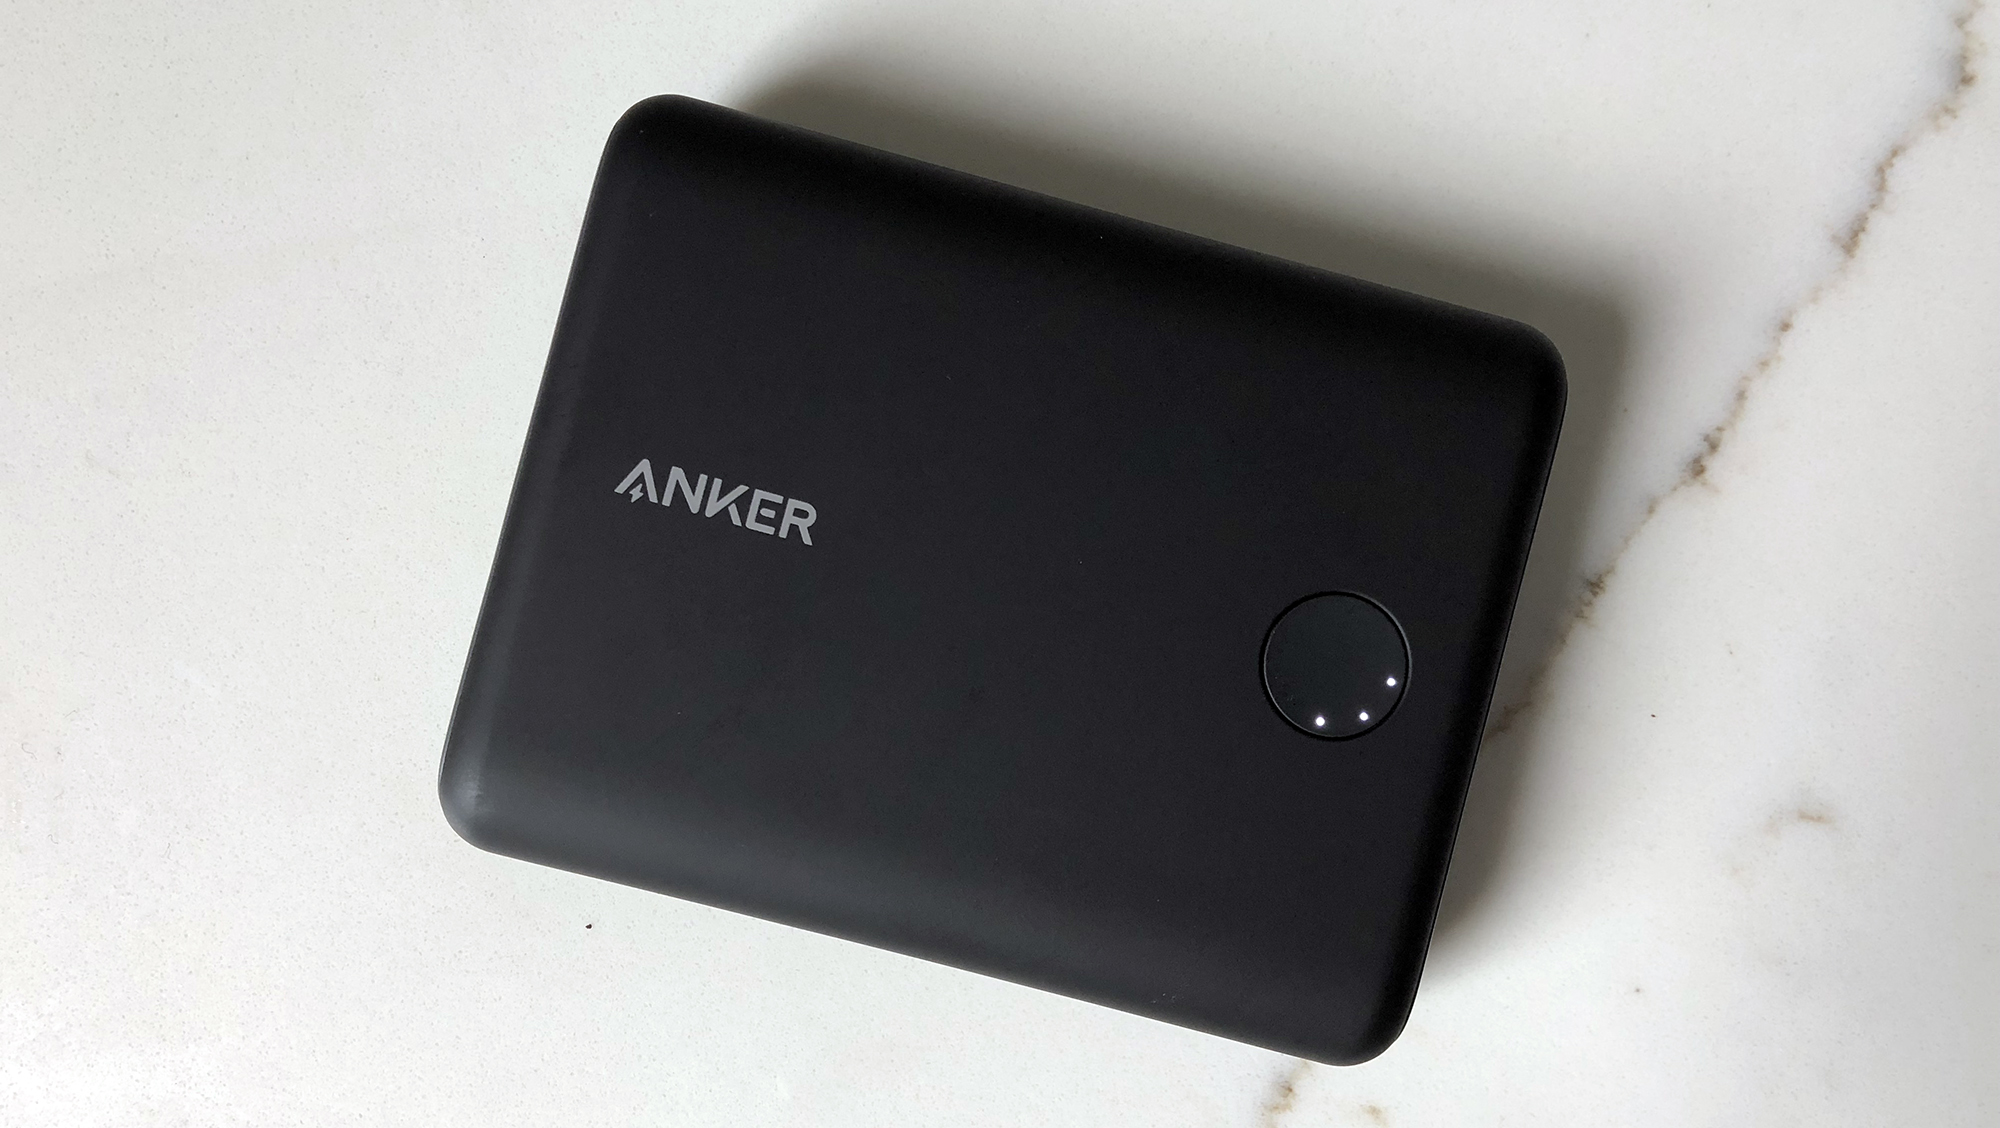 Hands-on: Anker's new Nintendo-approved Switch batteries offer peace of ...